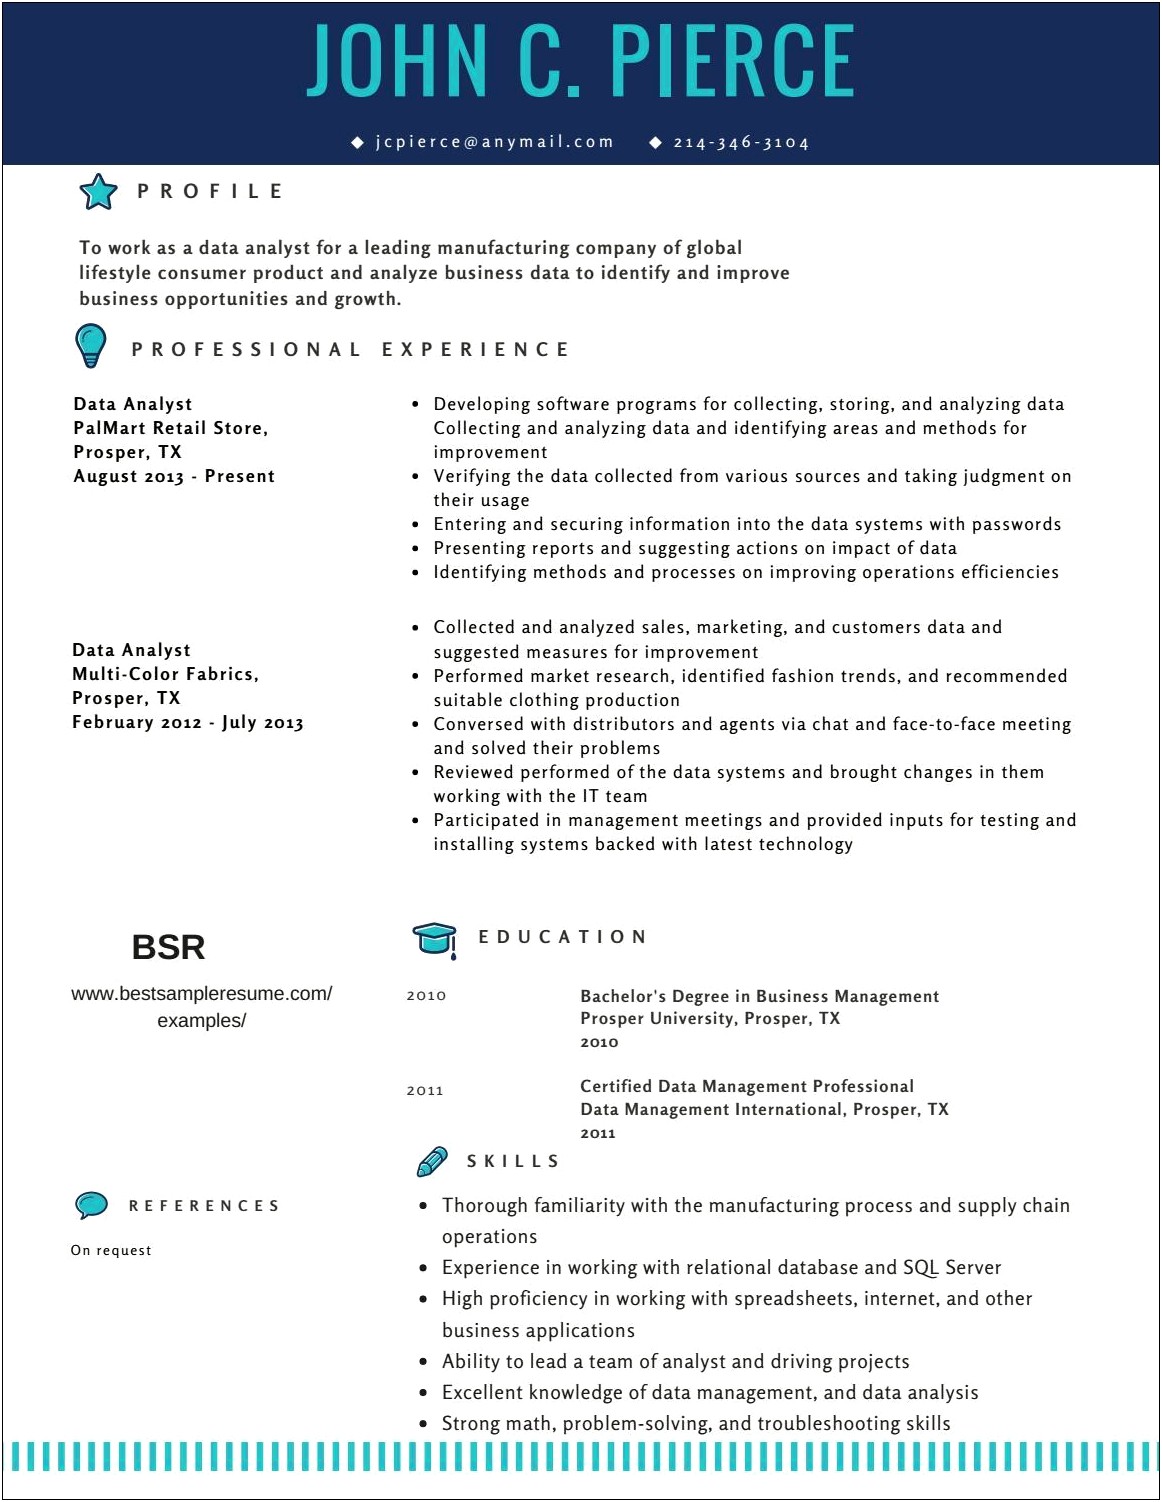 Resume Examples For Chat Agents